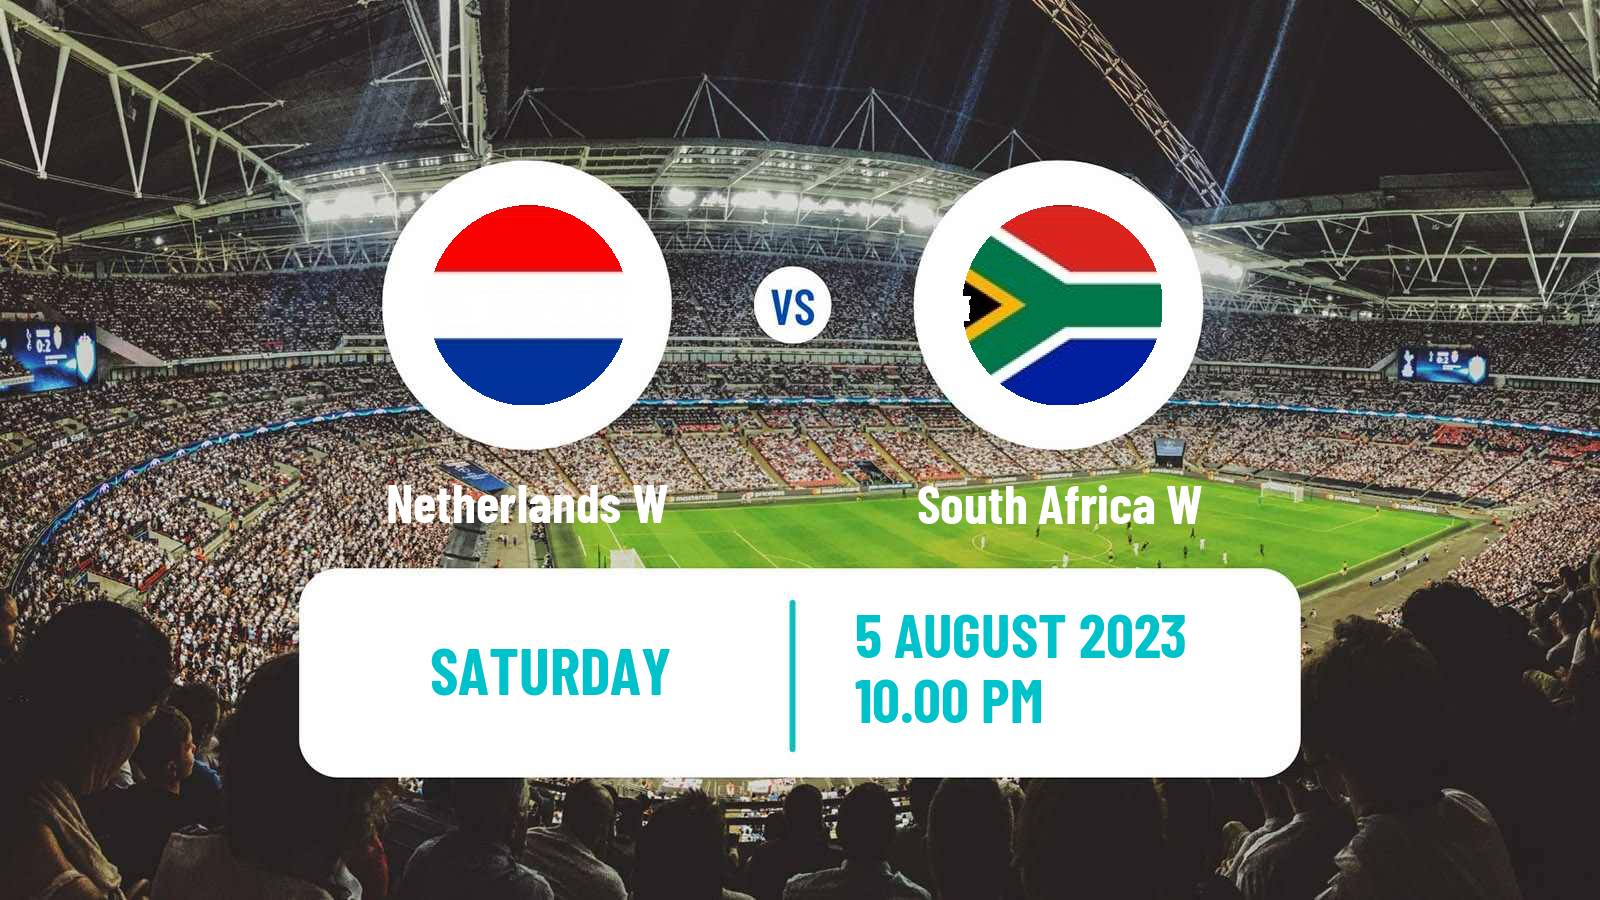 Soccer FIFA World Cup Women Netherlands W - South Africa W